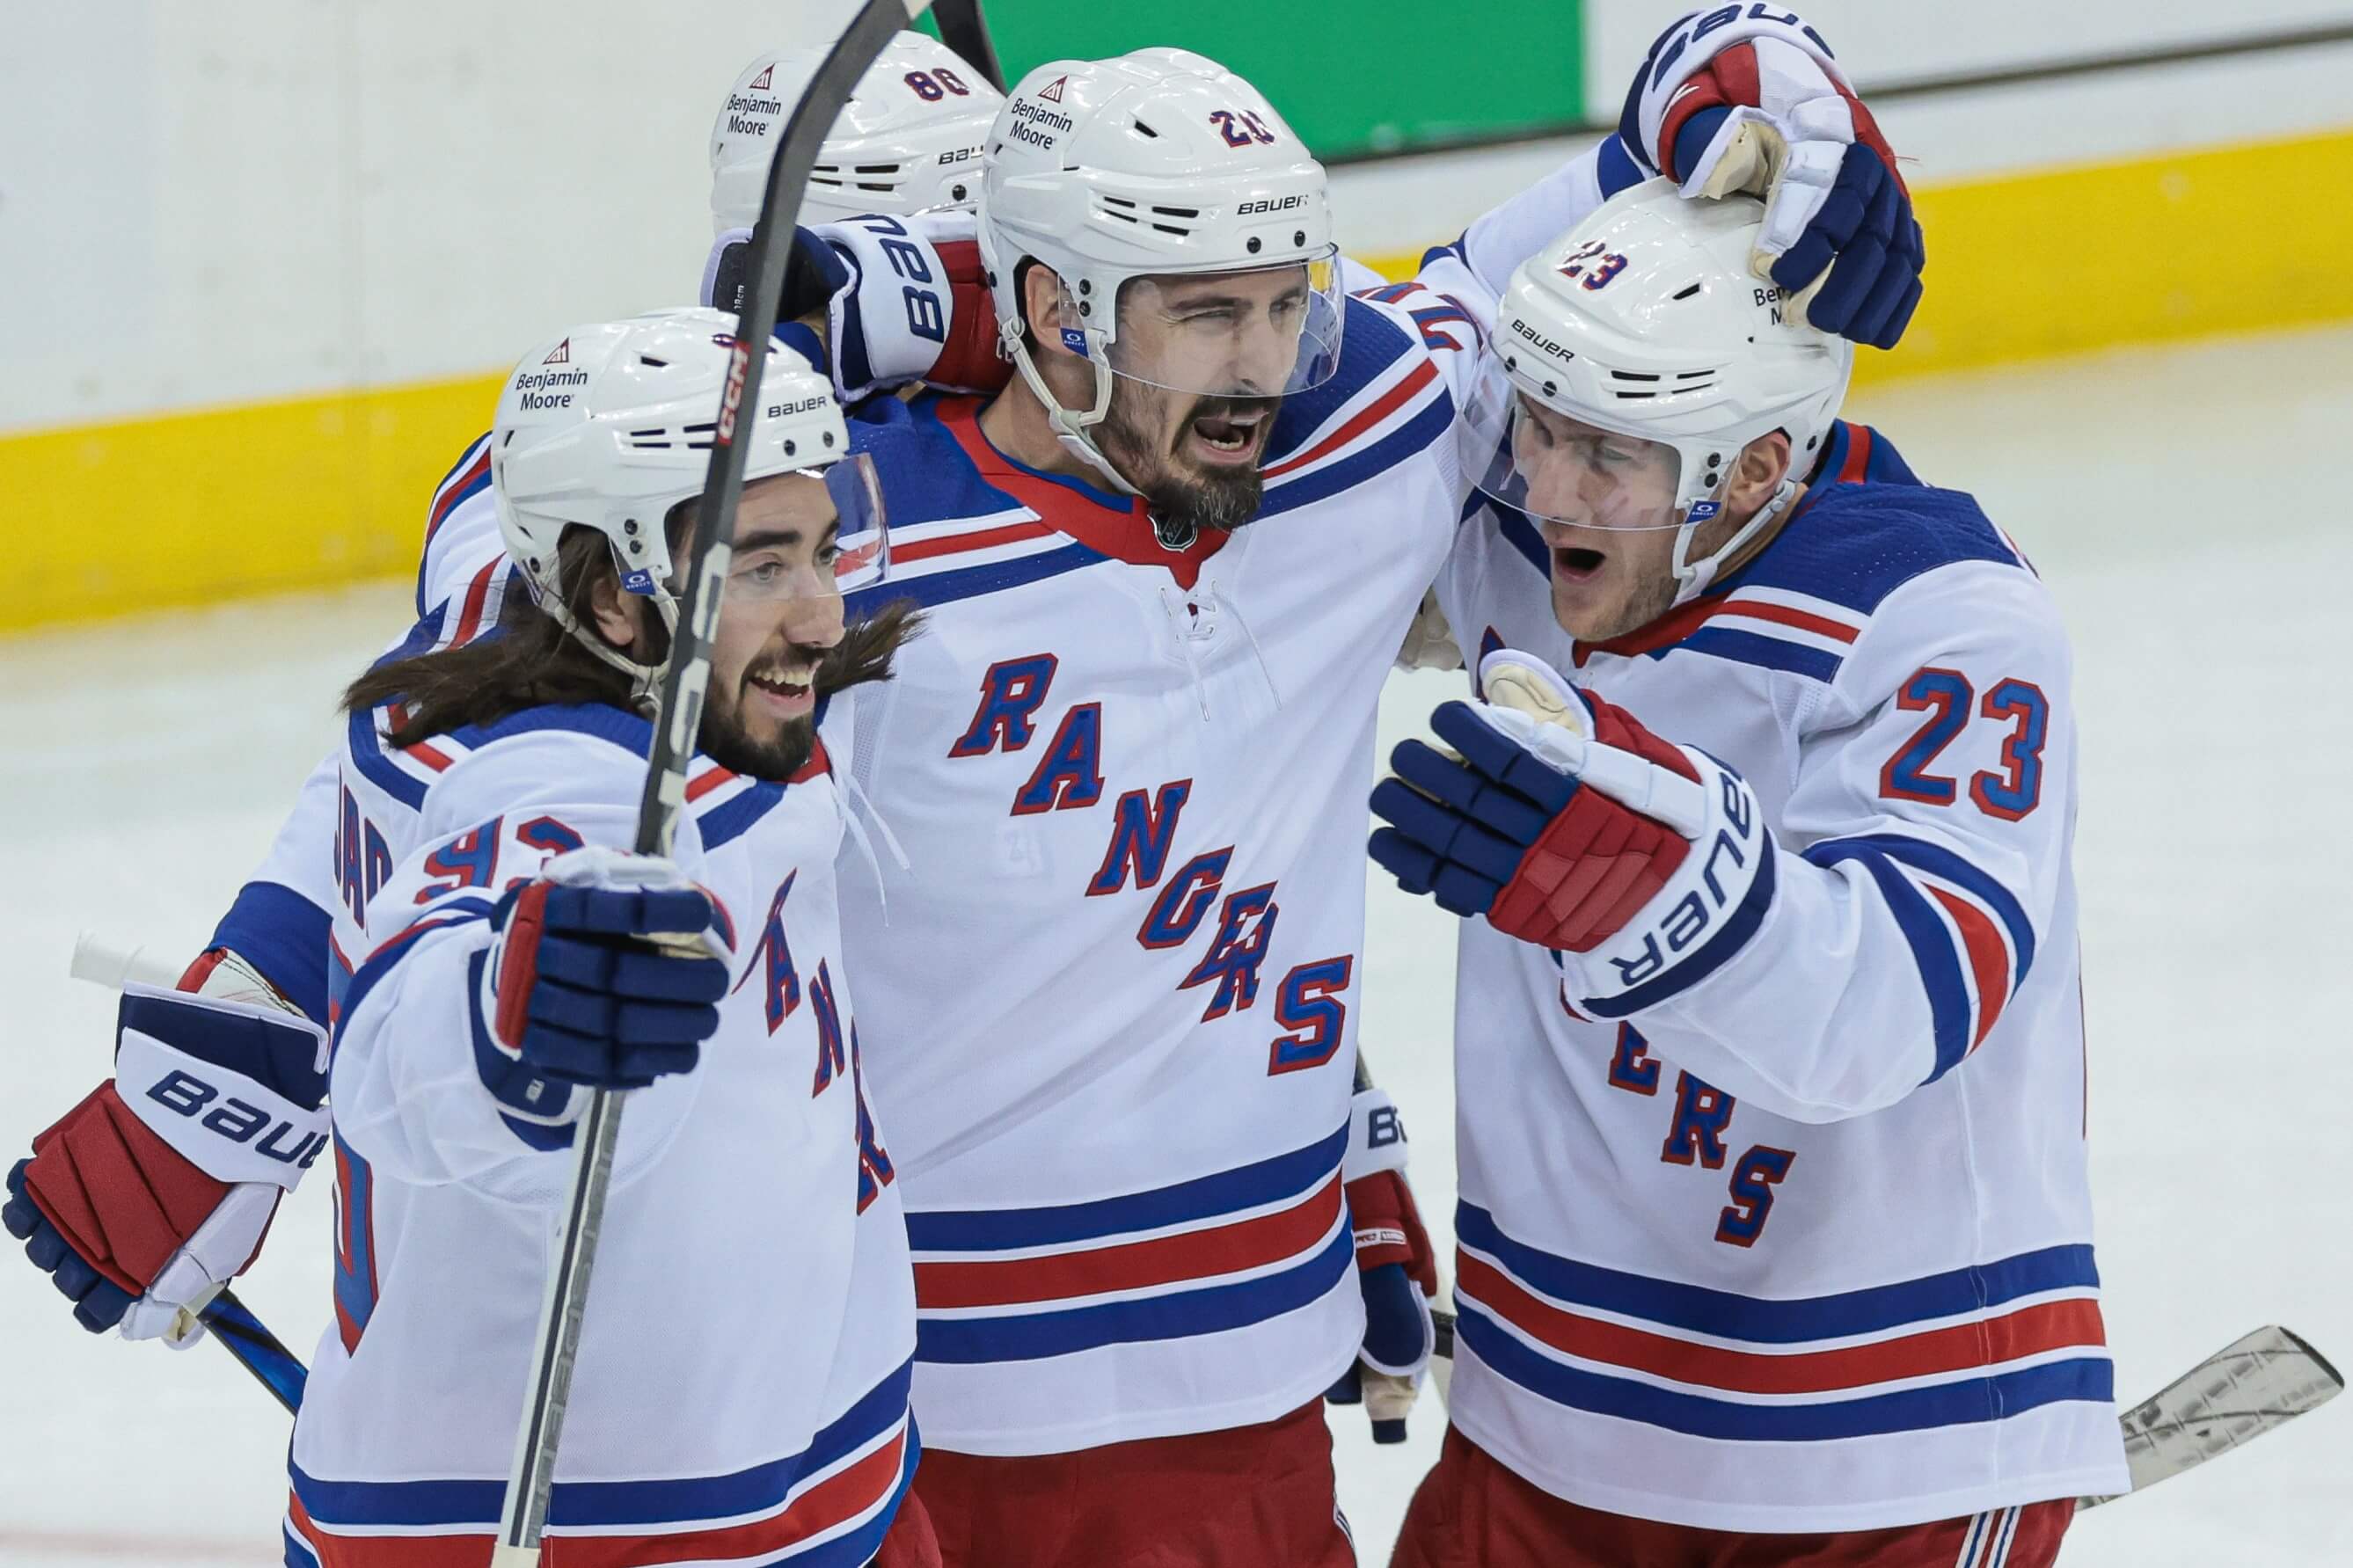 Game 7 Rangers vs. Devils picks and odds: Bet on New York and the under